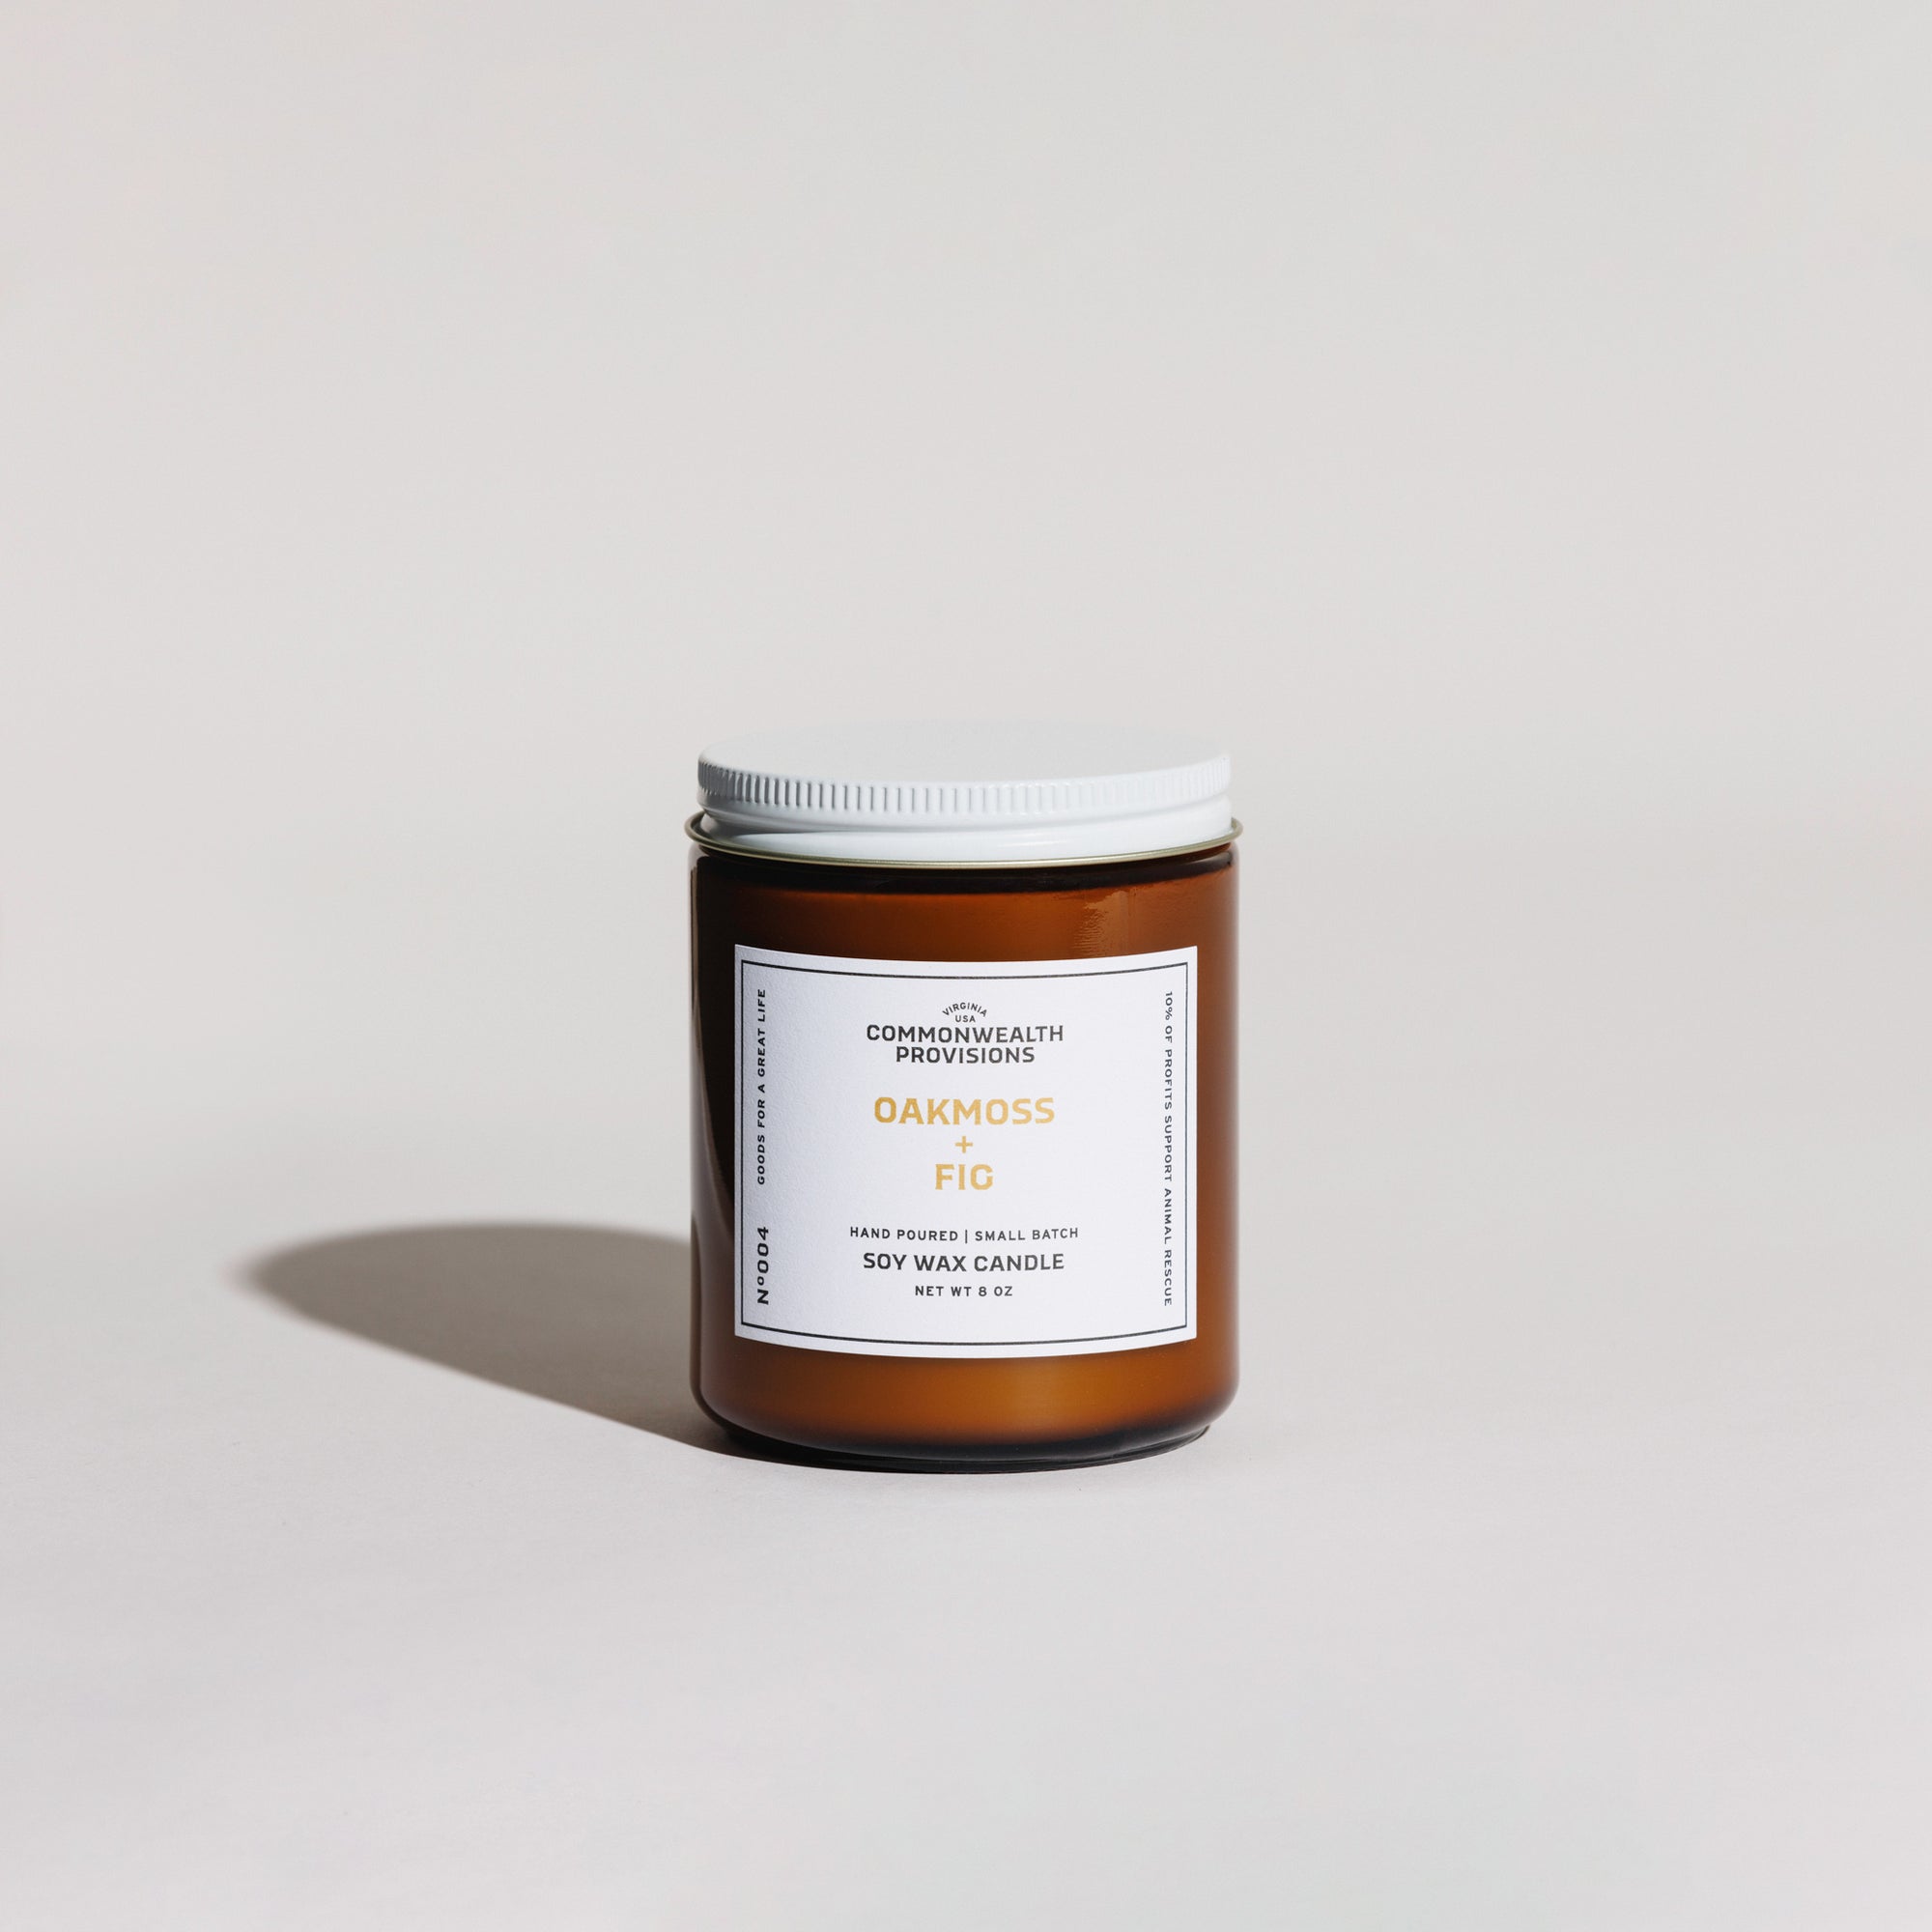 Oakmoss + Fig Standard Candle | Commonwealth Provisions